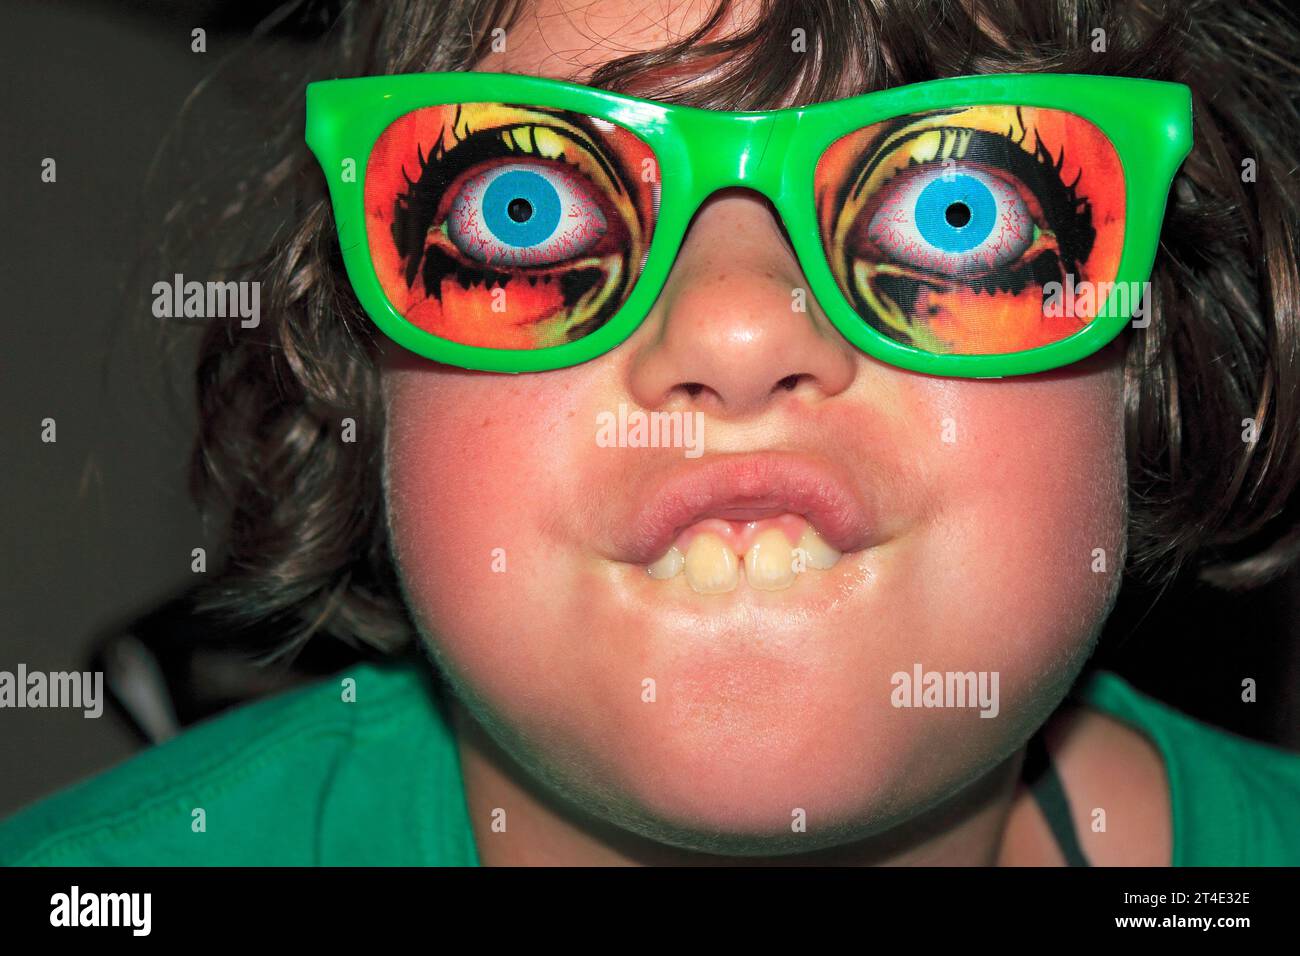 a 10 year old girl with funny glasses on Stock Photo